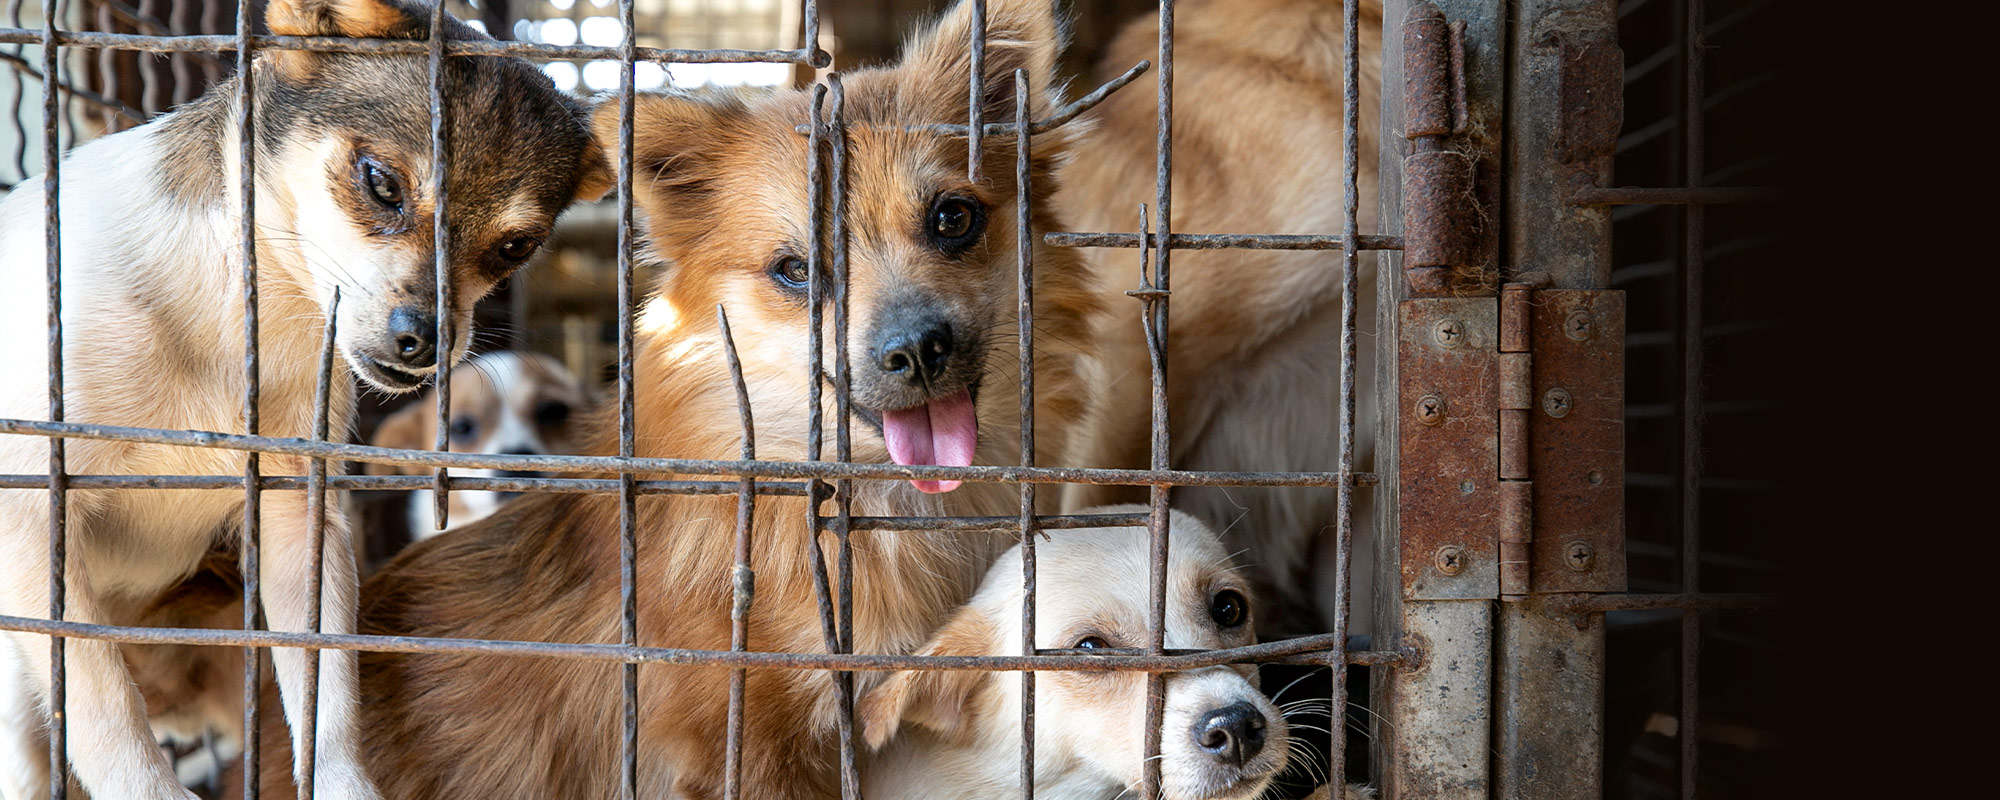 Baker, center, is shown locked in a cage at a dog meat farm in Haemi, South Korea